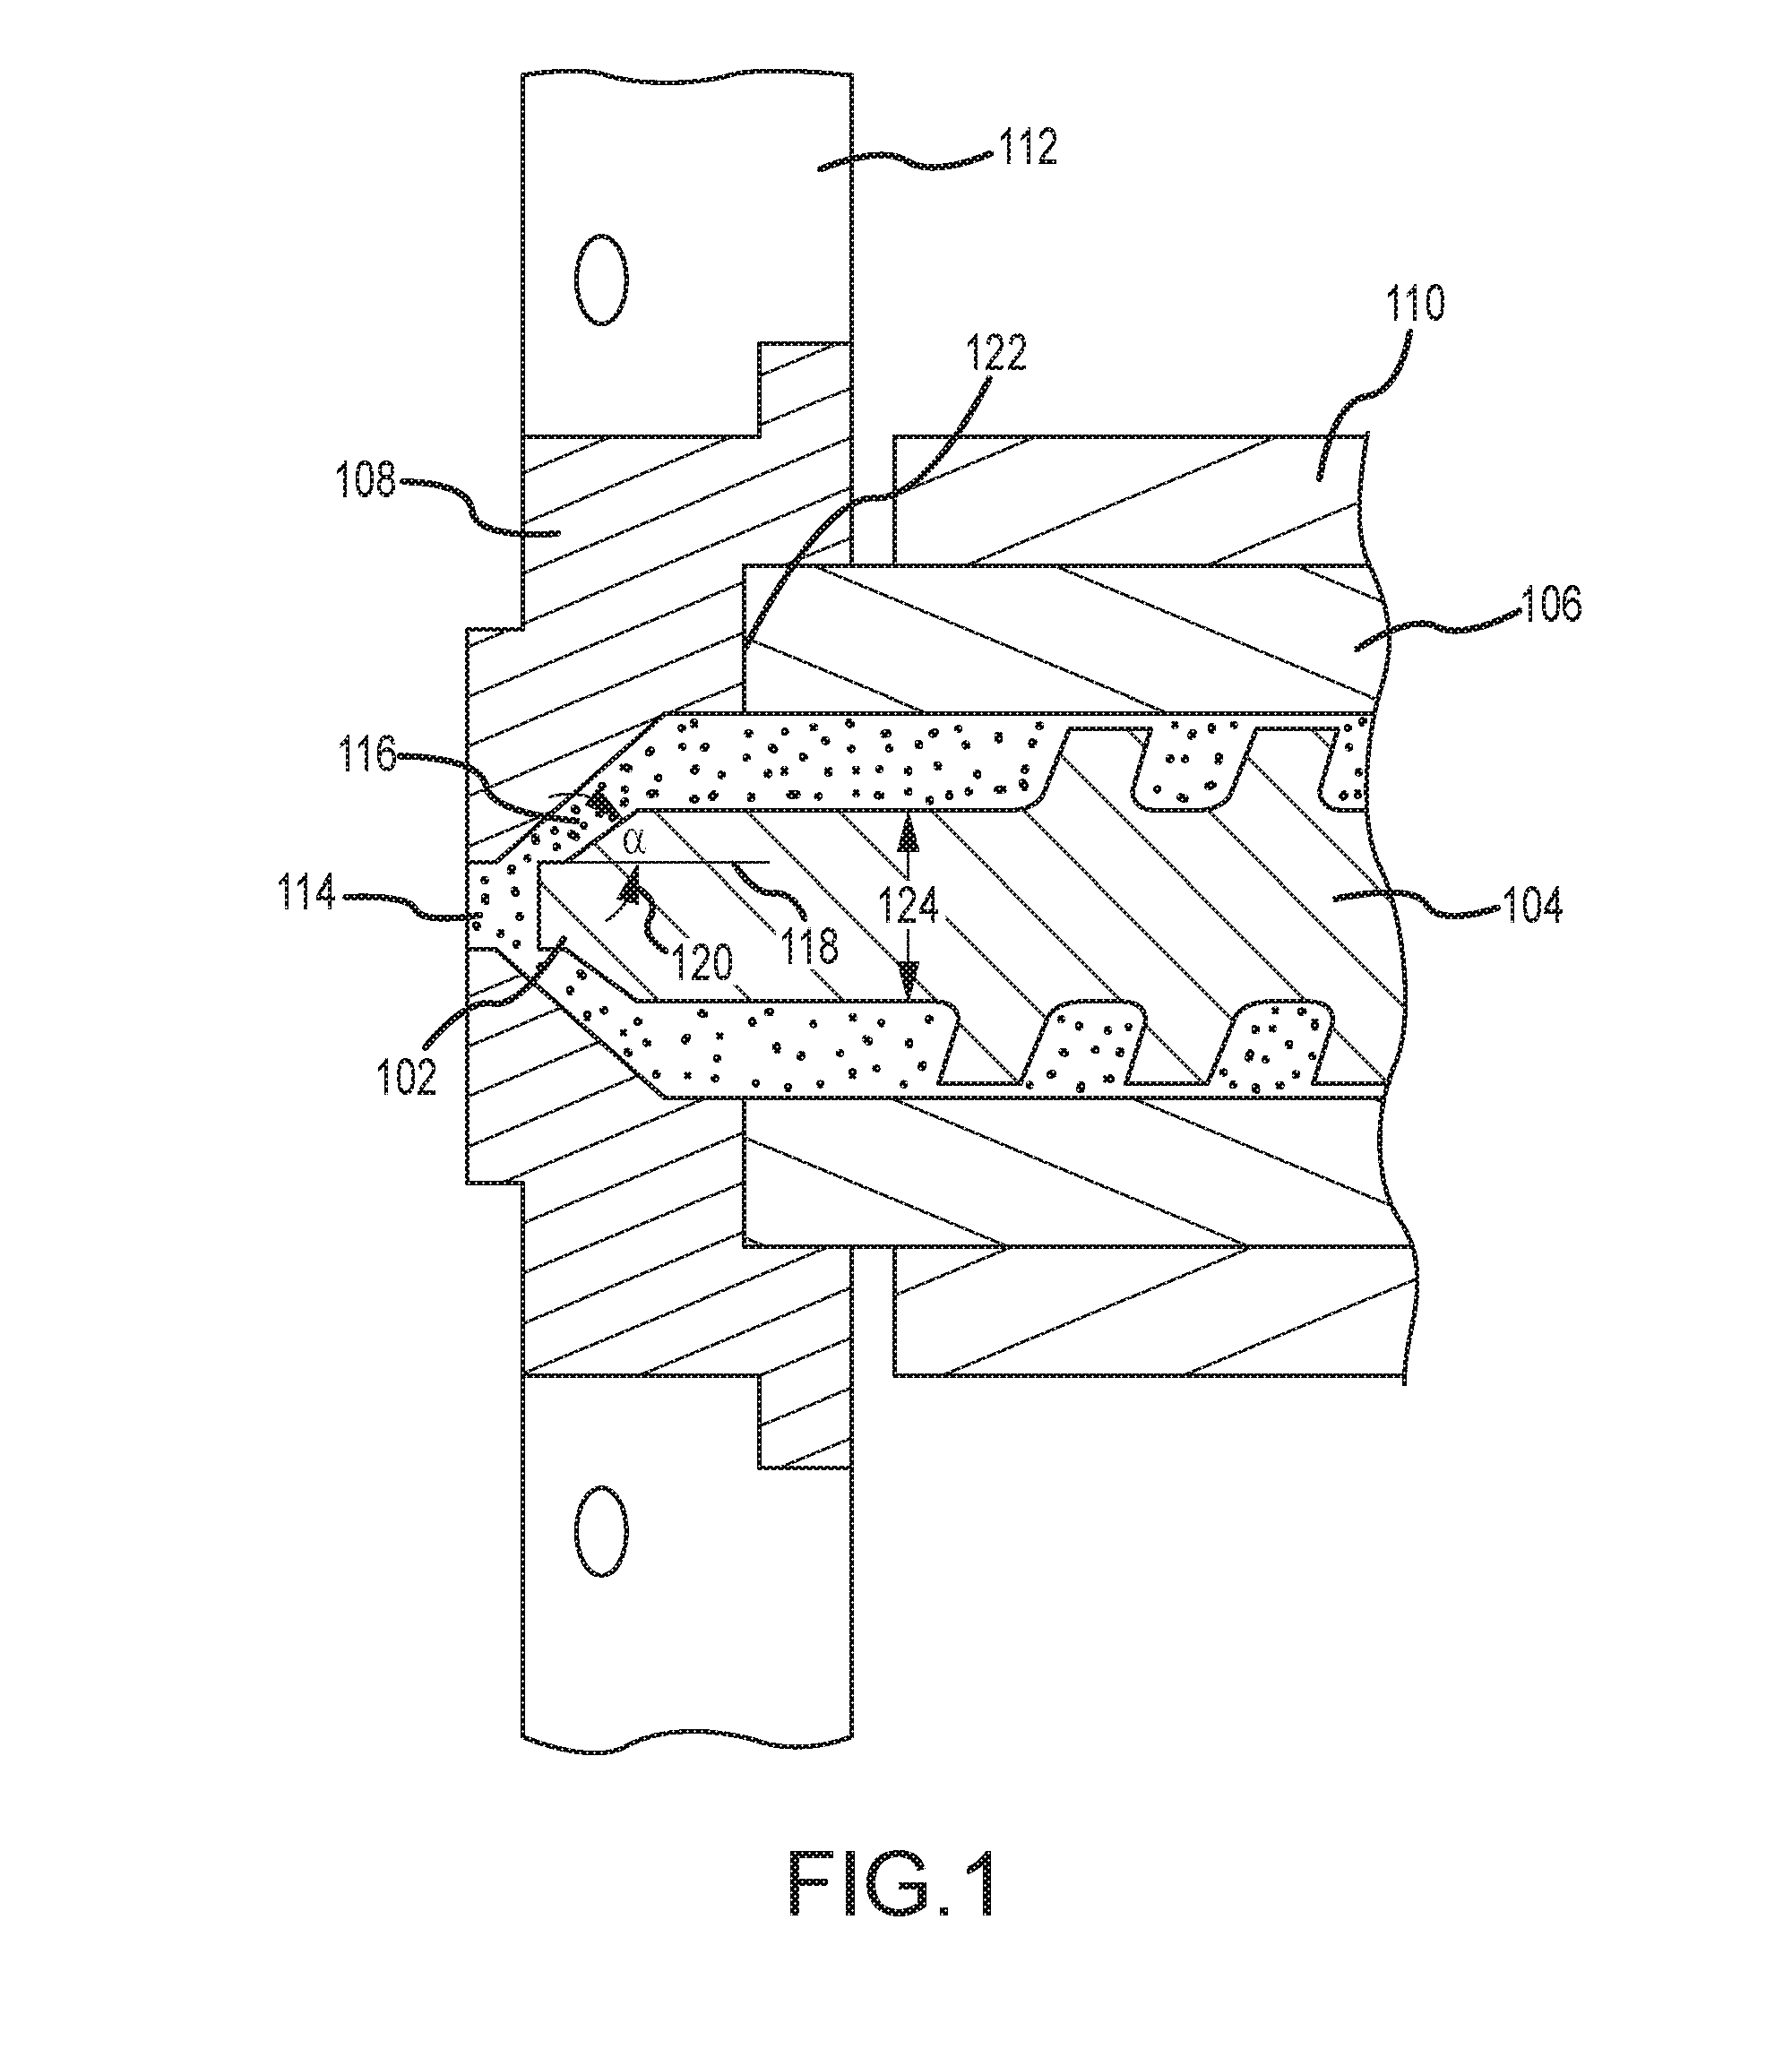 Nozzle shut off for injection molding system